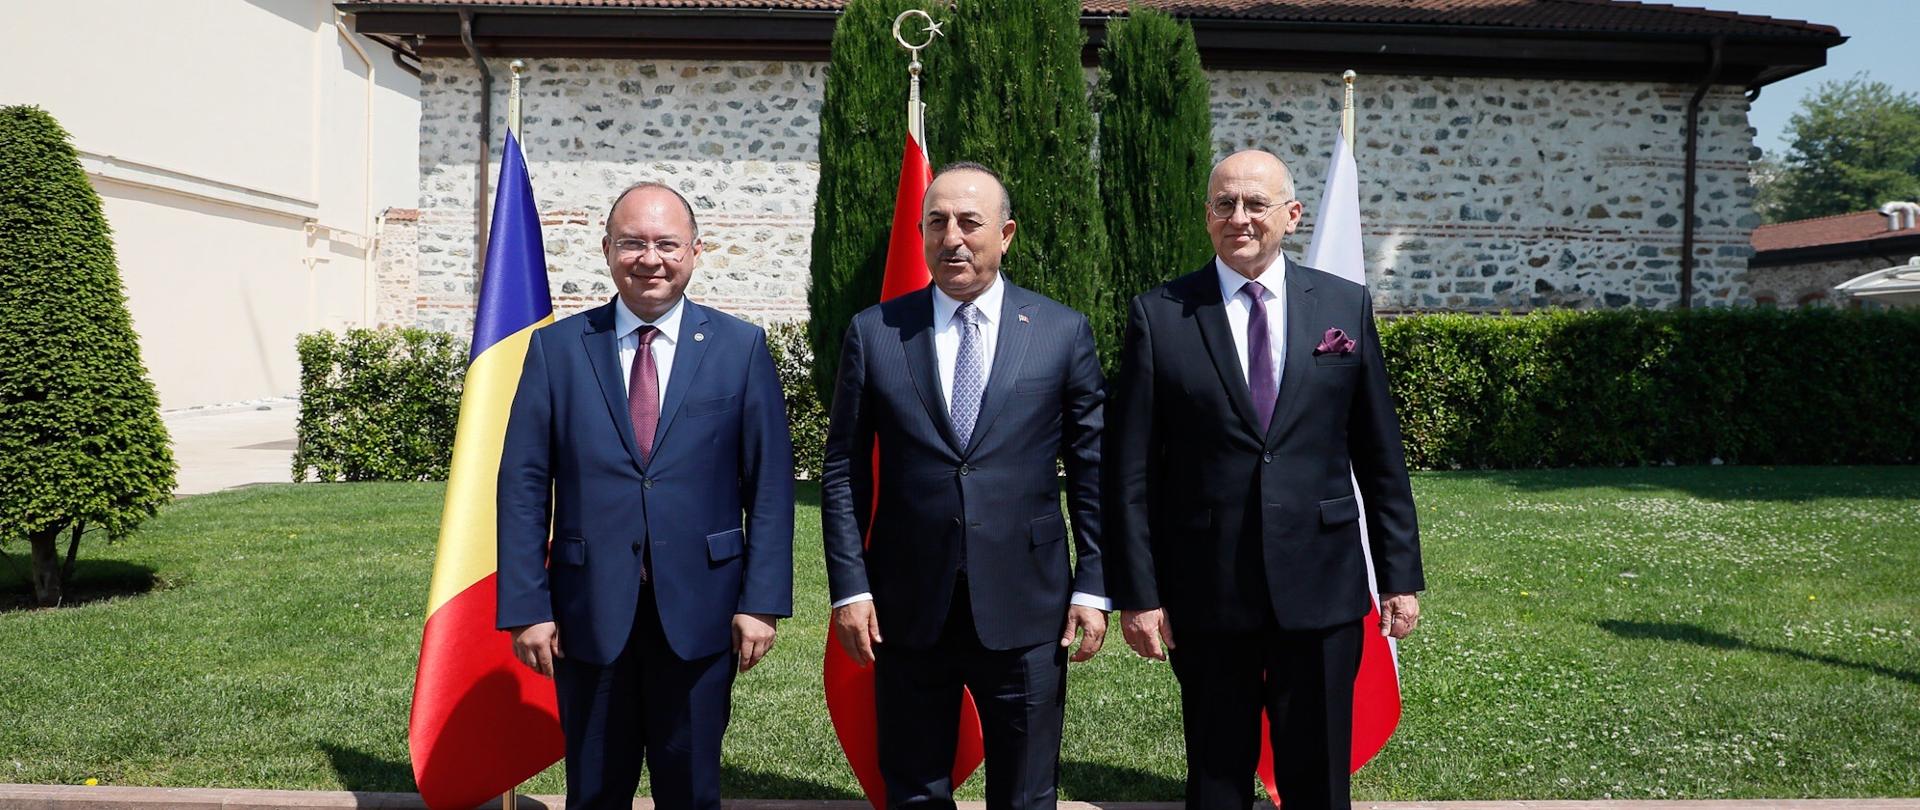 Minister Zbigniew Rau met with his counterparts from Romania, Bogdan Aurescu and Turkey, Mevlüt Çavuşoğlu, as part of the Istanbul Trilogue